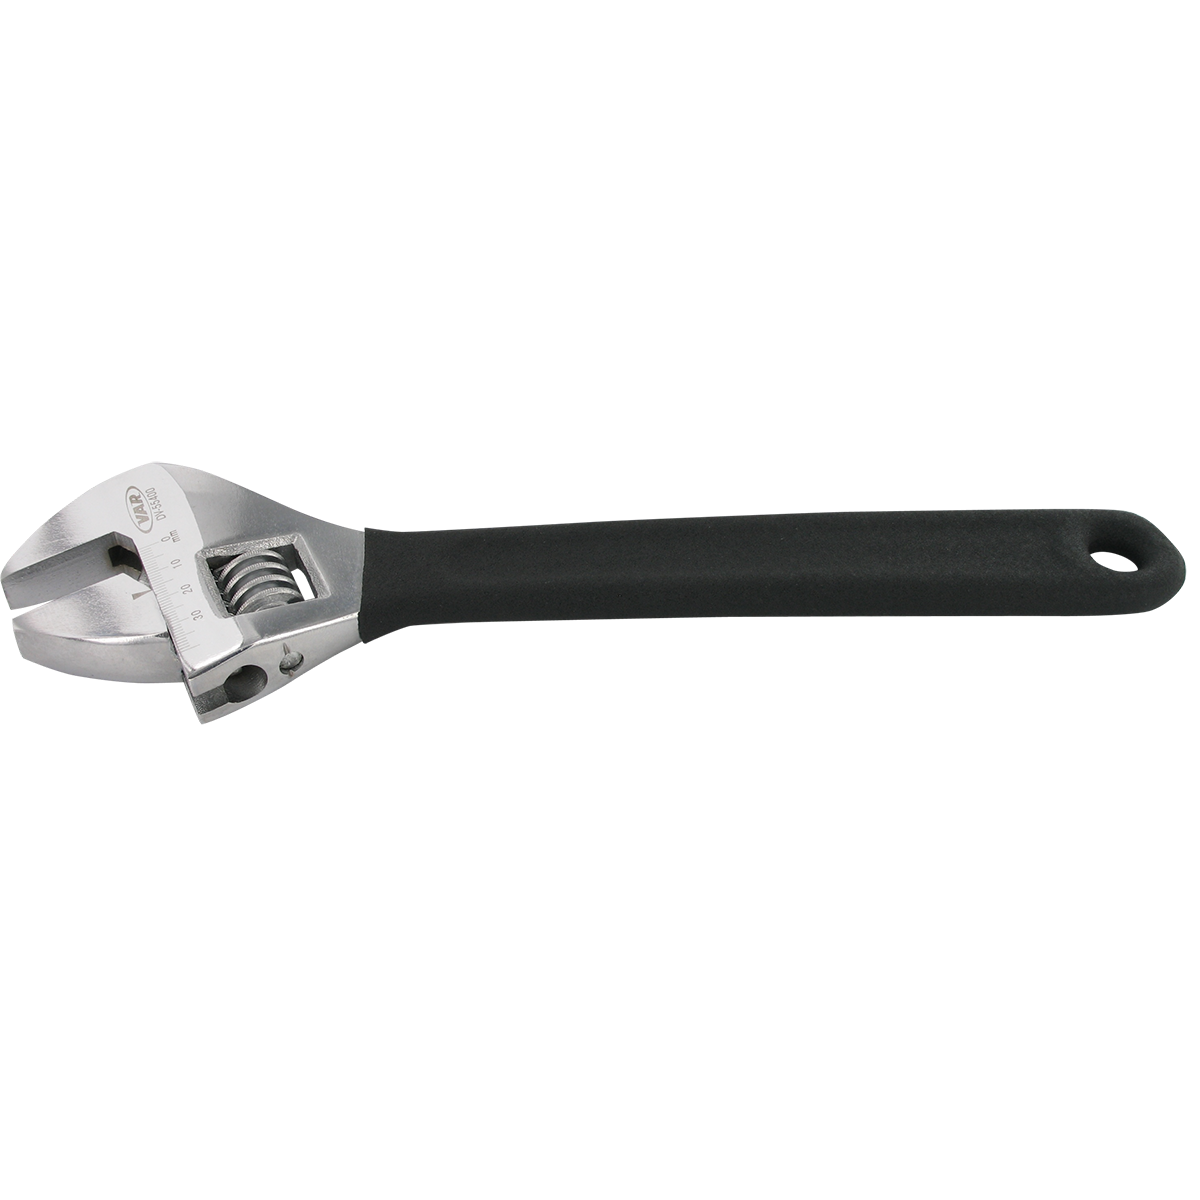 12" adjustable wrench 